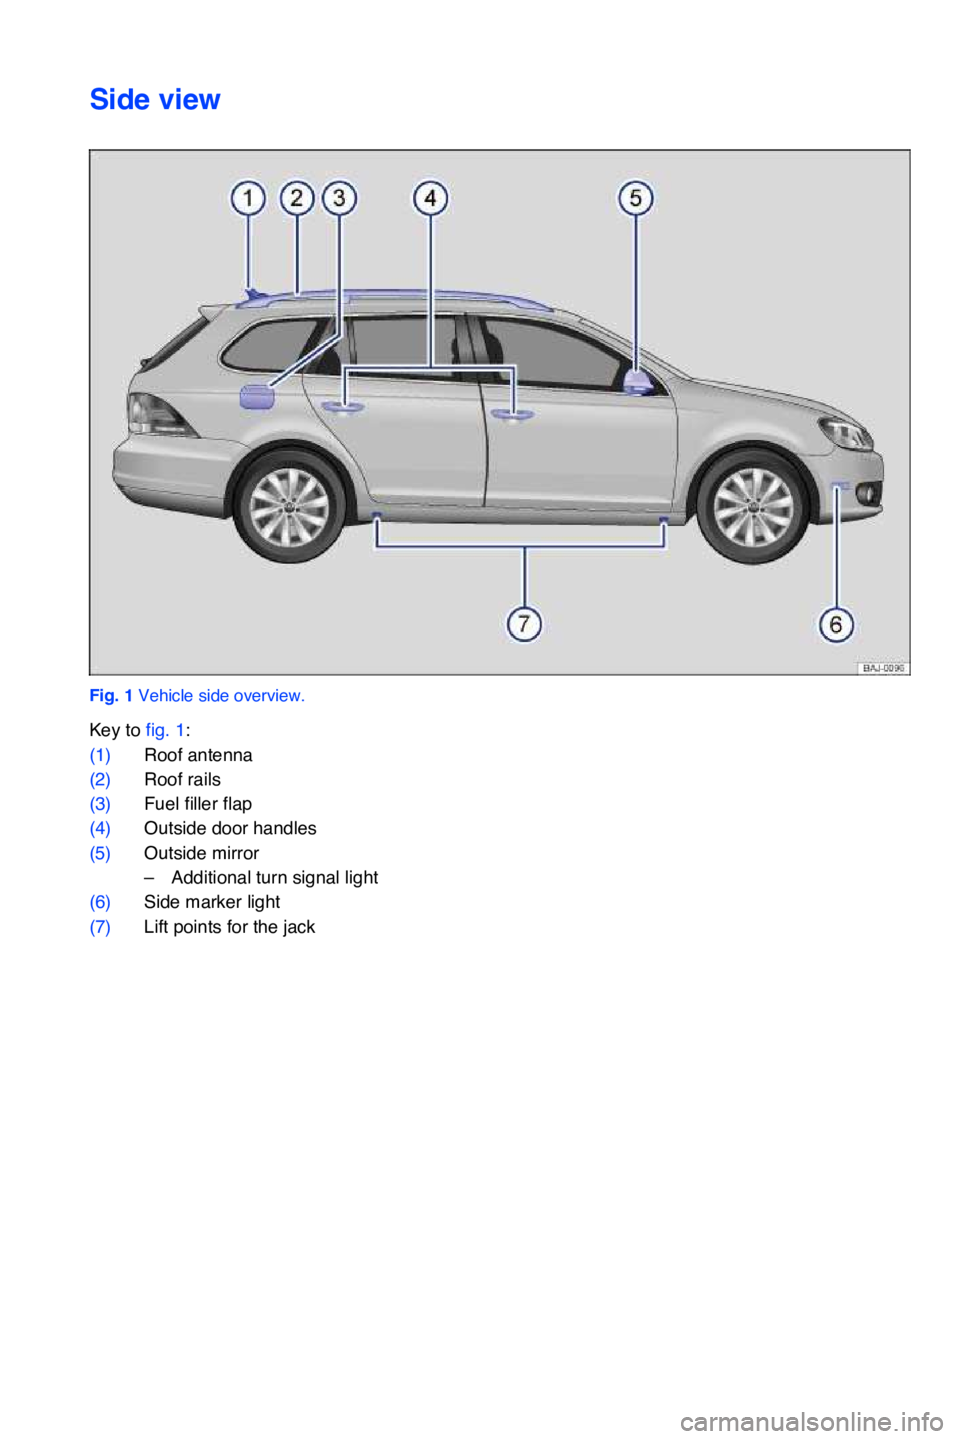 VOLKSWAGEN JETTA SPORTWAGEN 2013  Owners Manual Side view
Fig. 1 Vehicle side overview.
Key to fig. 1:
(1)Roof antenna 
(2)Roof rails 
(3)Fuel filler flap 
(4)Outside door handles
(5)Outside mirror 
–Additional turn signal light 
(6)Side marker l